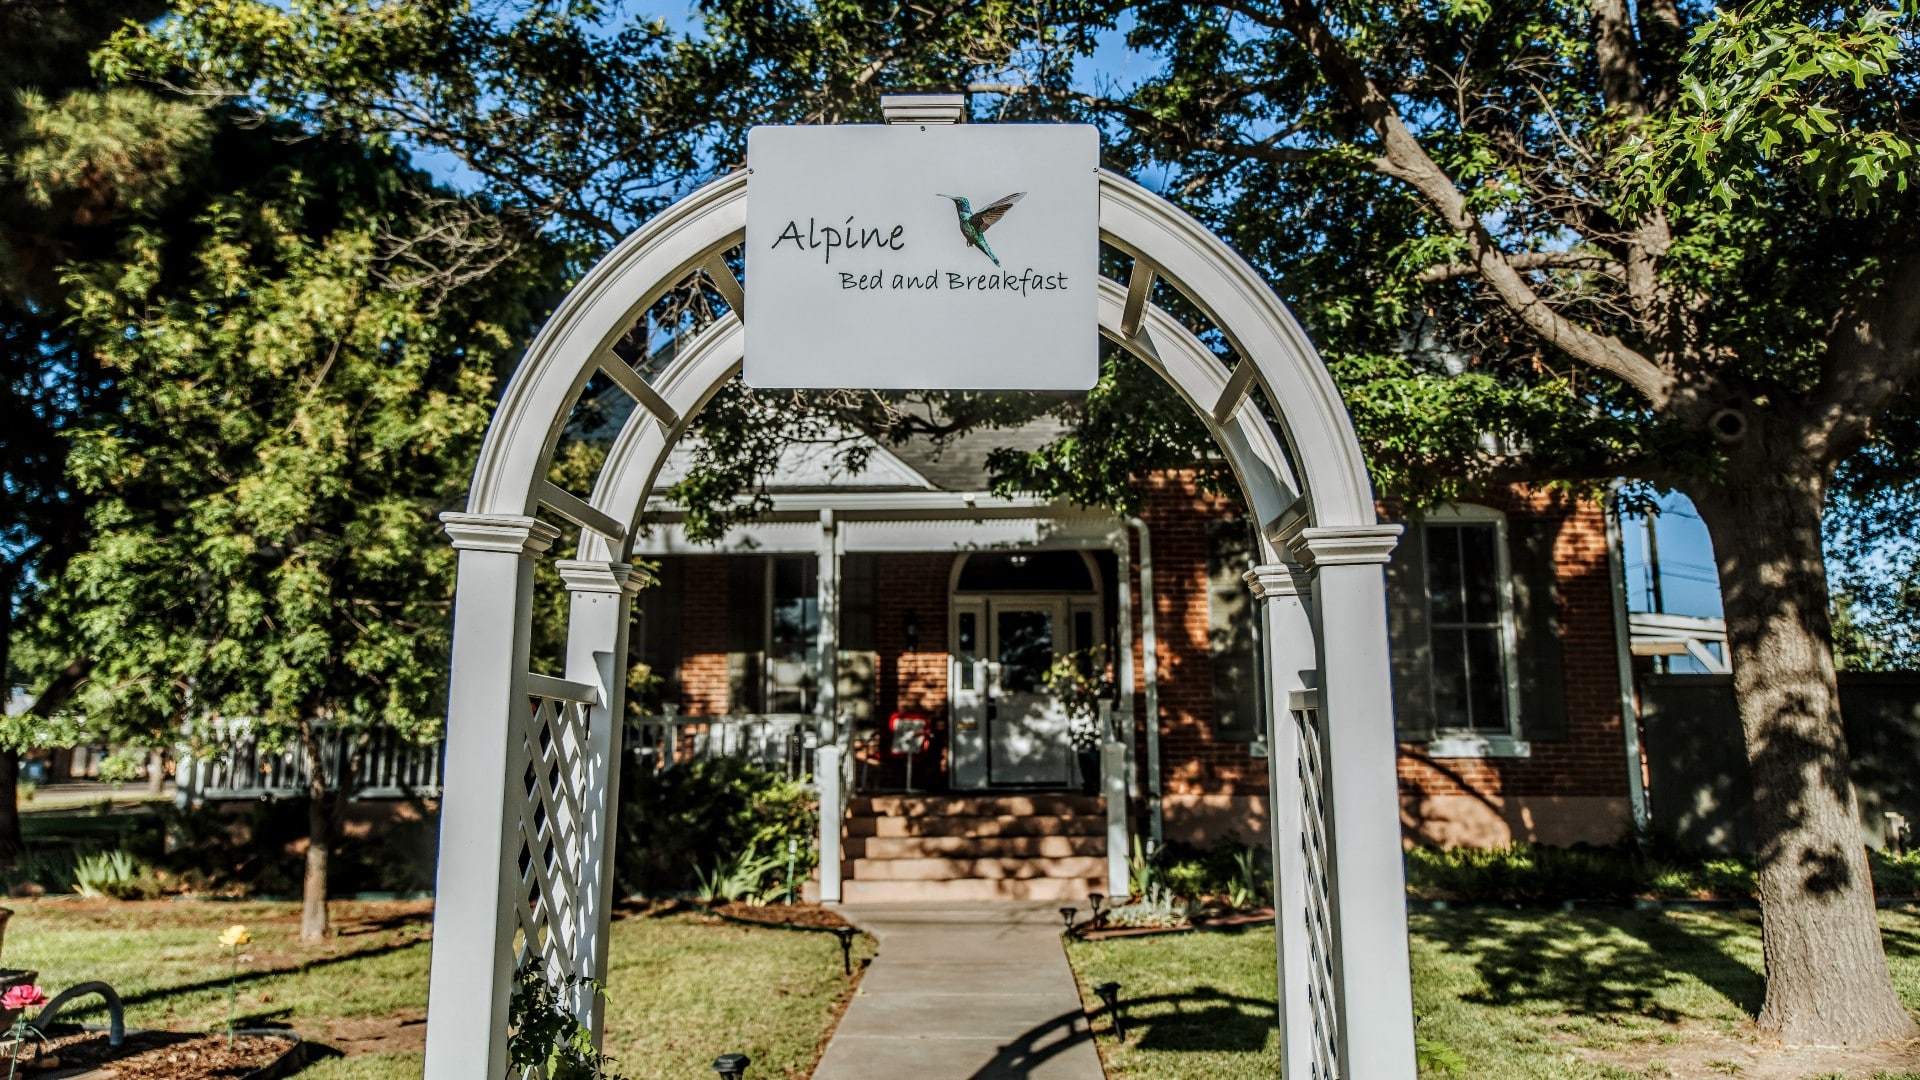 An archway with a business sign at the end of a sidewalk in front of a brick home surrounded by trees.